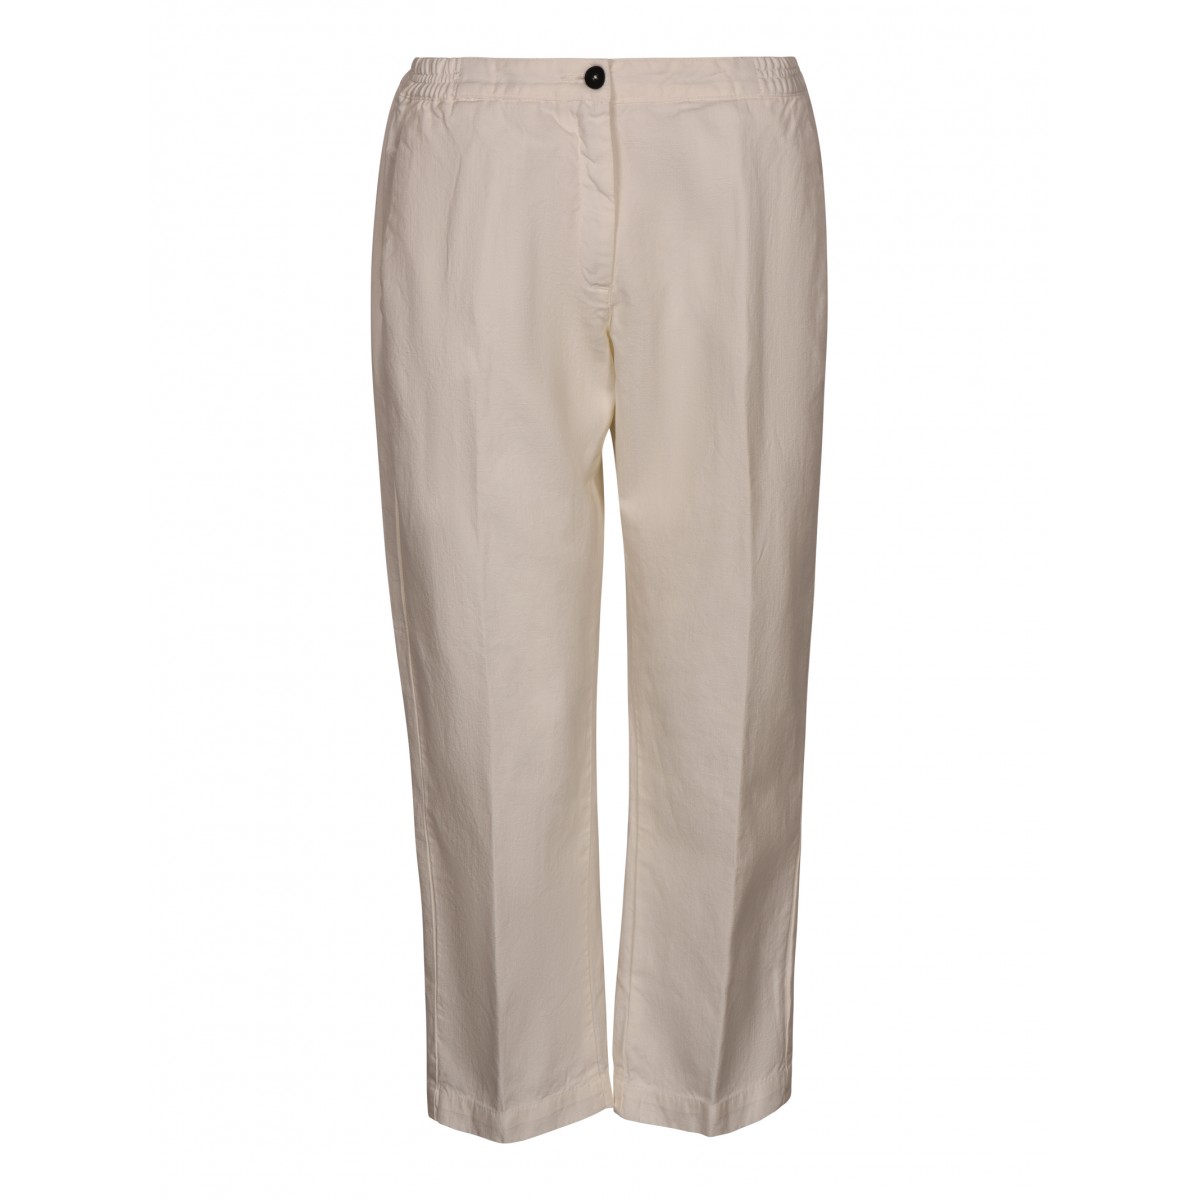 Ivory Cotton and Linen Cropped Pants